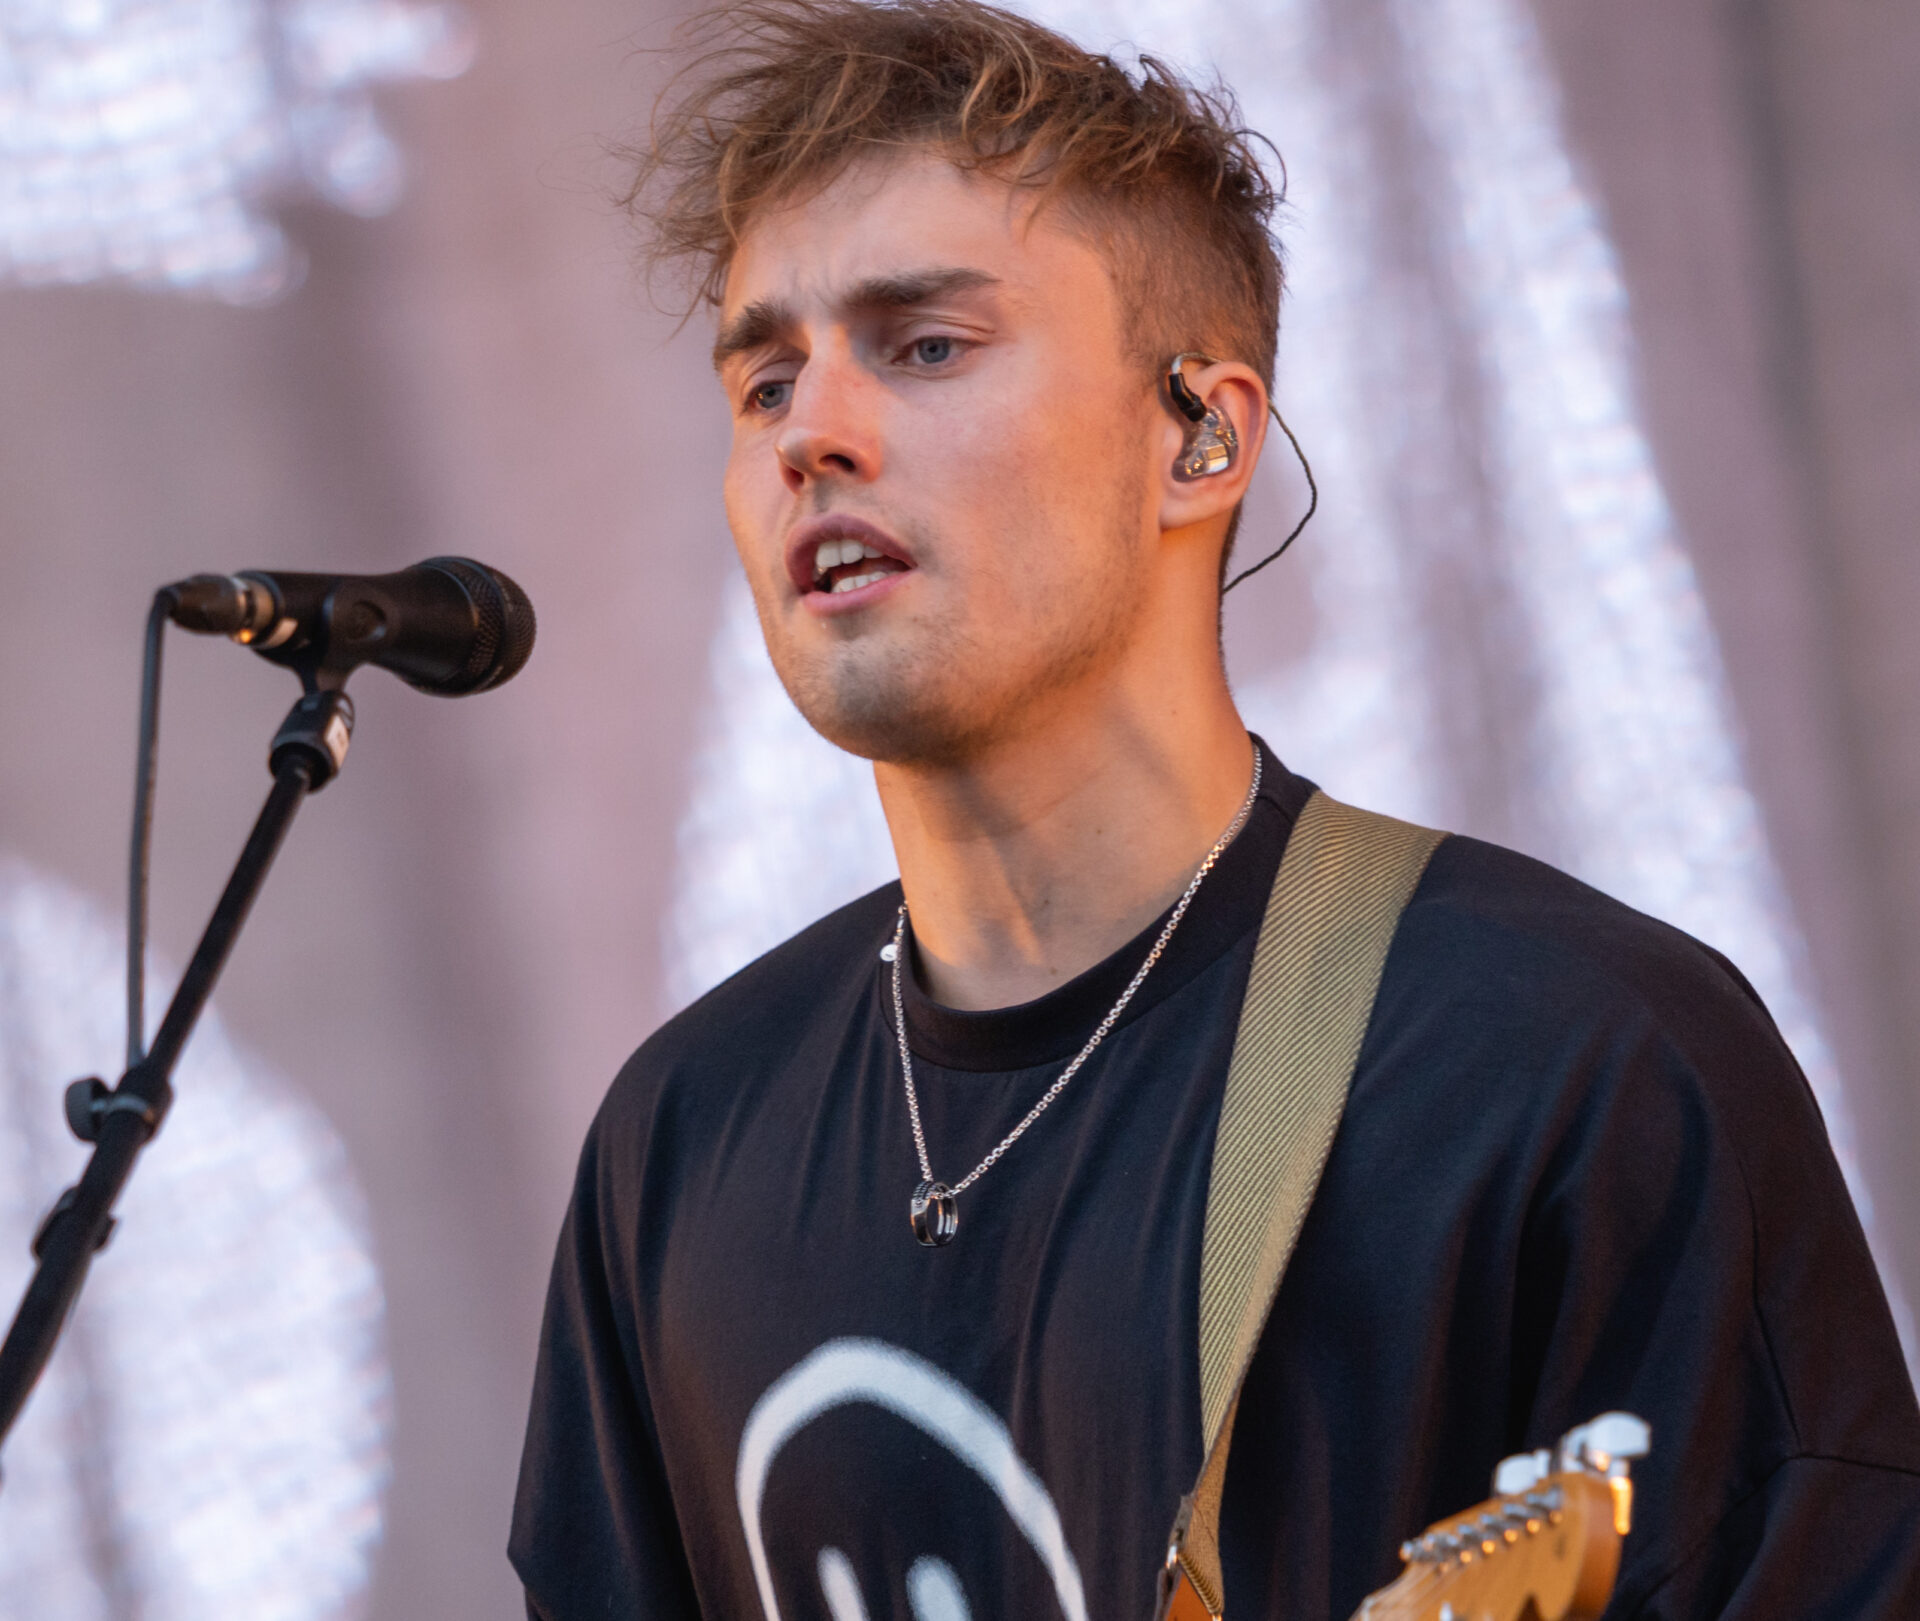 Sam Fender said he considered selling drugs, before music provided a way out -theentertainment.vision